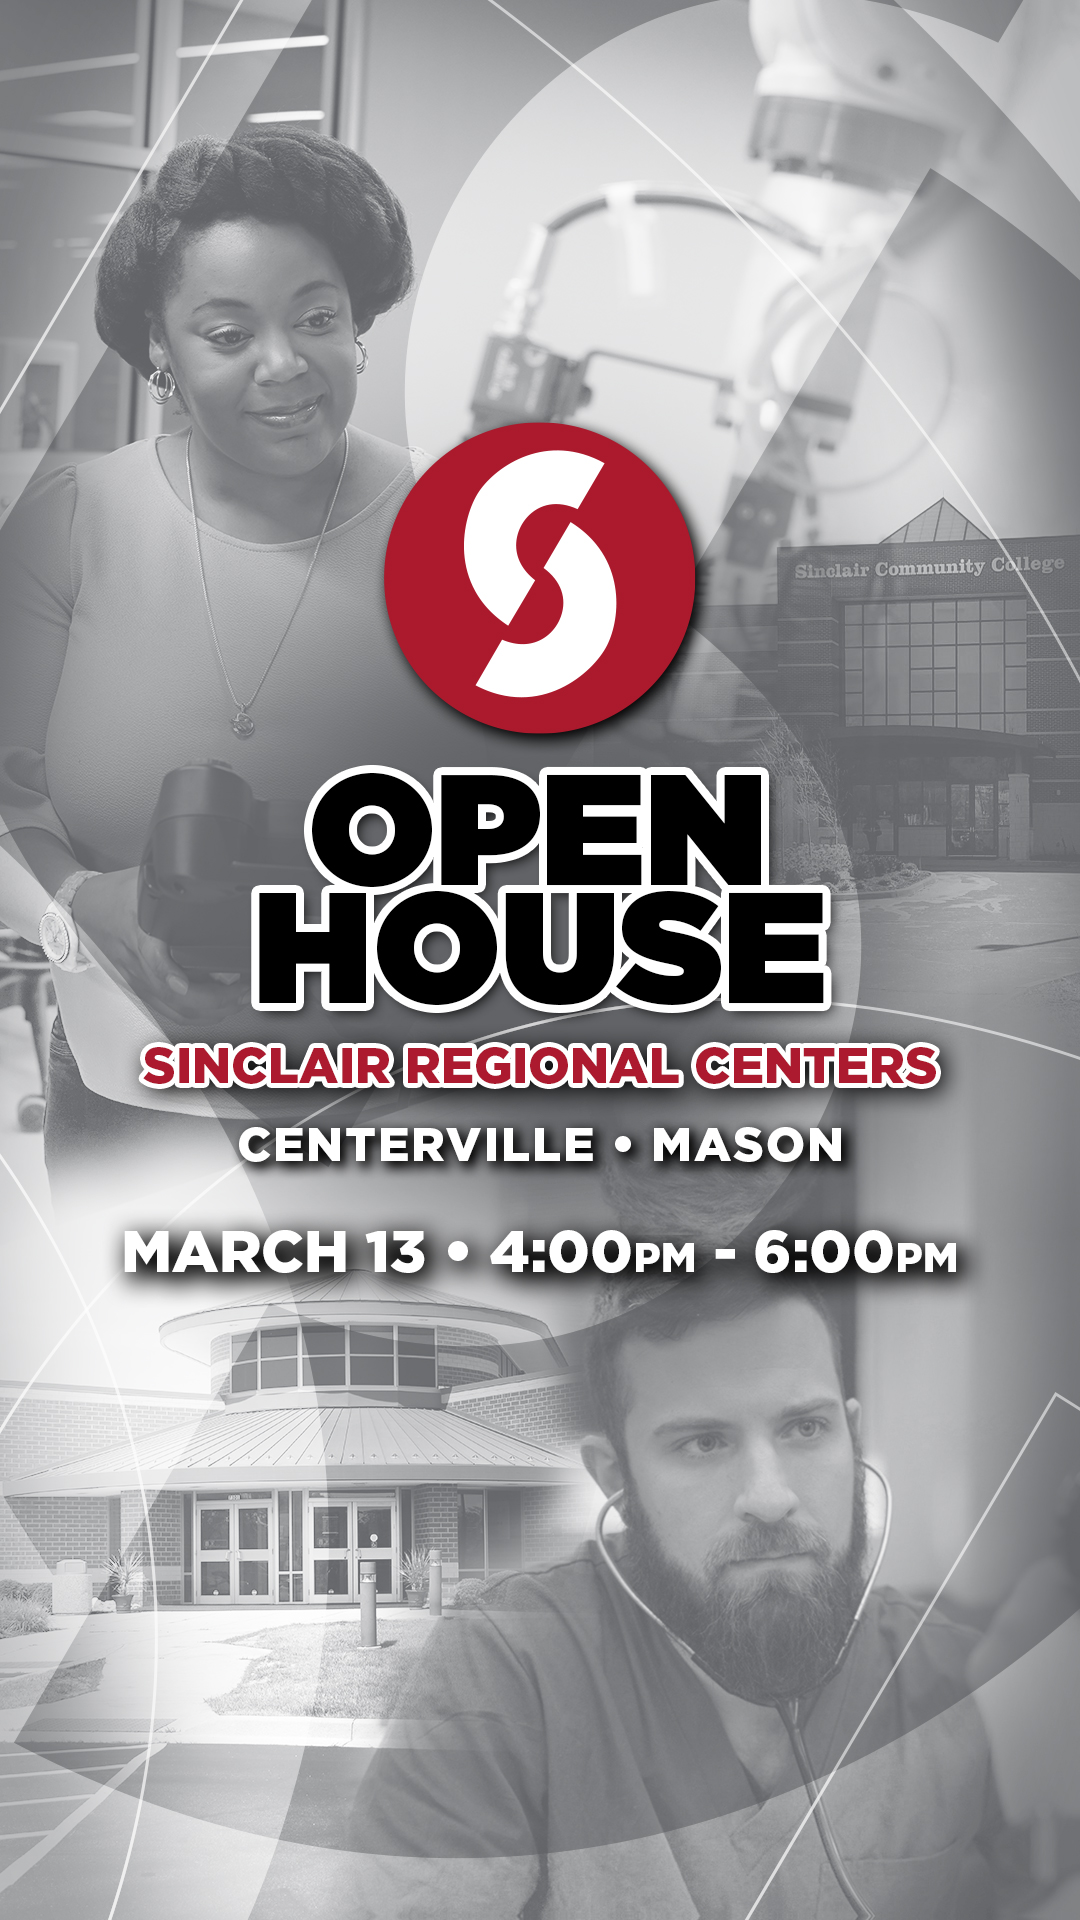 Sinclair Regional Centers Open House - Centerville & Mason Locations, Wednesday, March 13, 4pm - 6:30pm